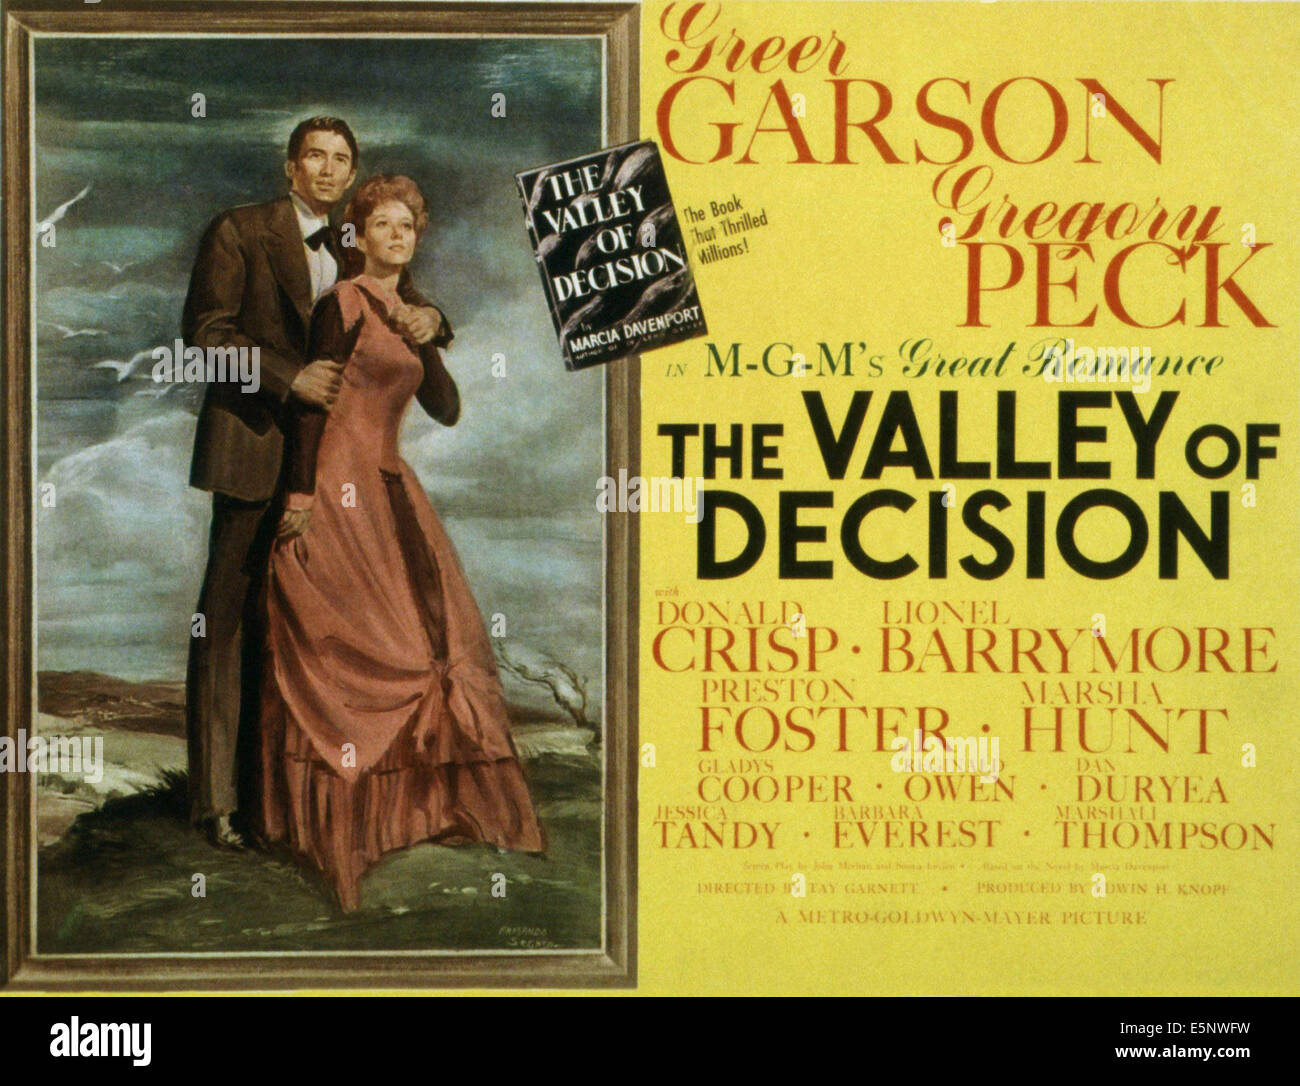 THE VALLEY OF DECISION, Gregory Peck, Greer Garson, 1945 Stock Photo